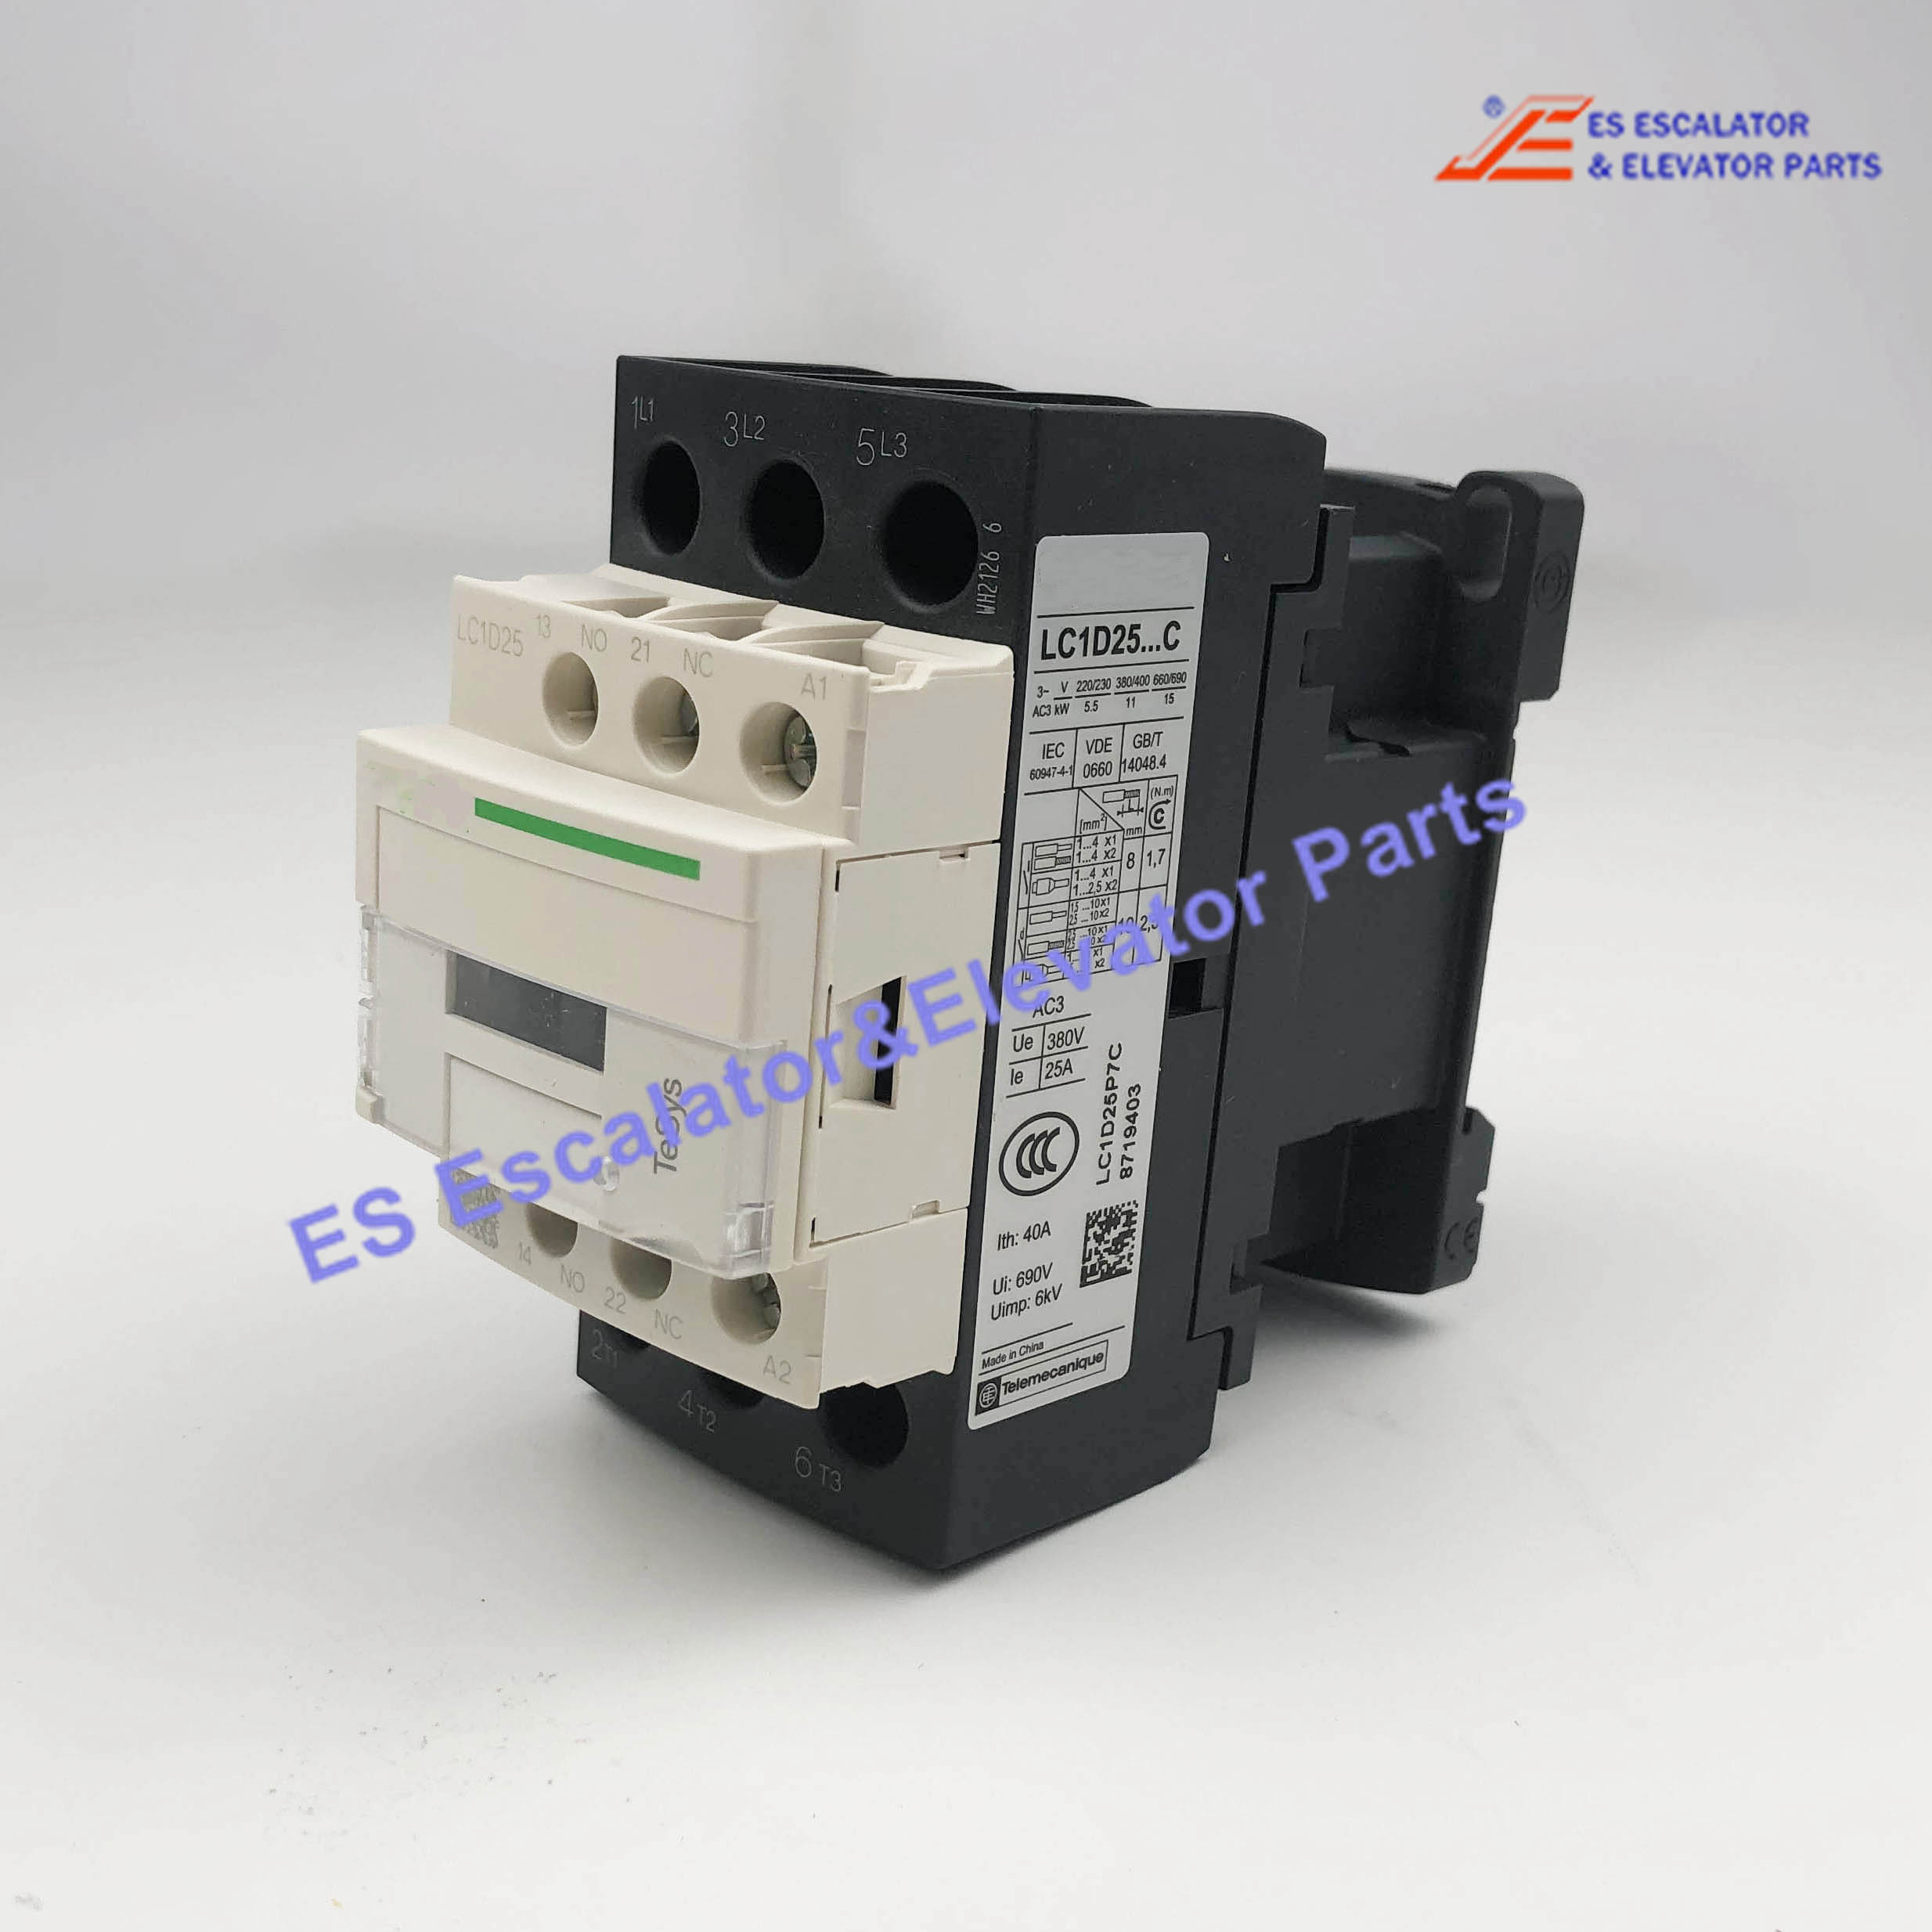 LC1D25 Elevator Auxiliary Contact Block Electric Contactor 230V 50/60HZ Use For Schindler